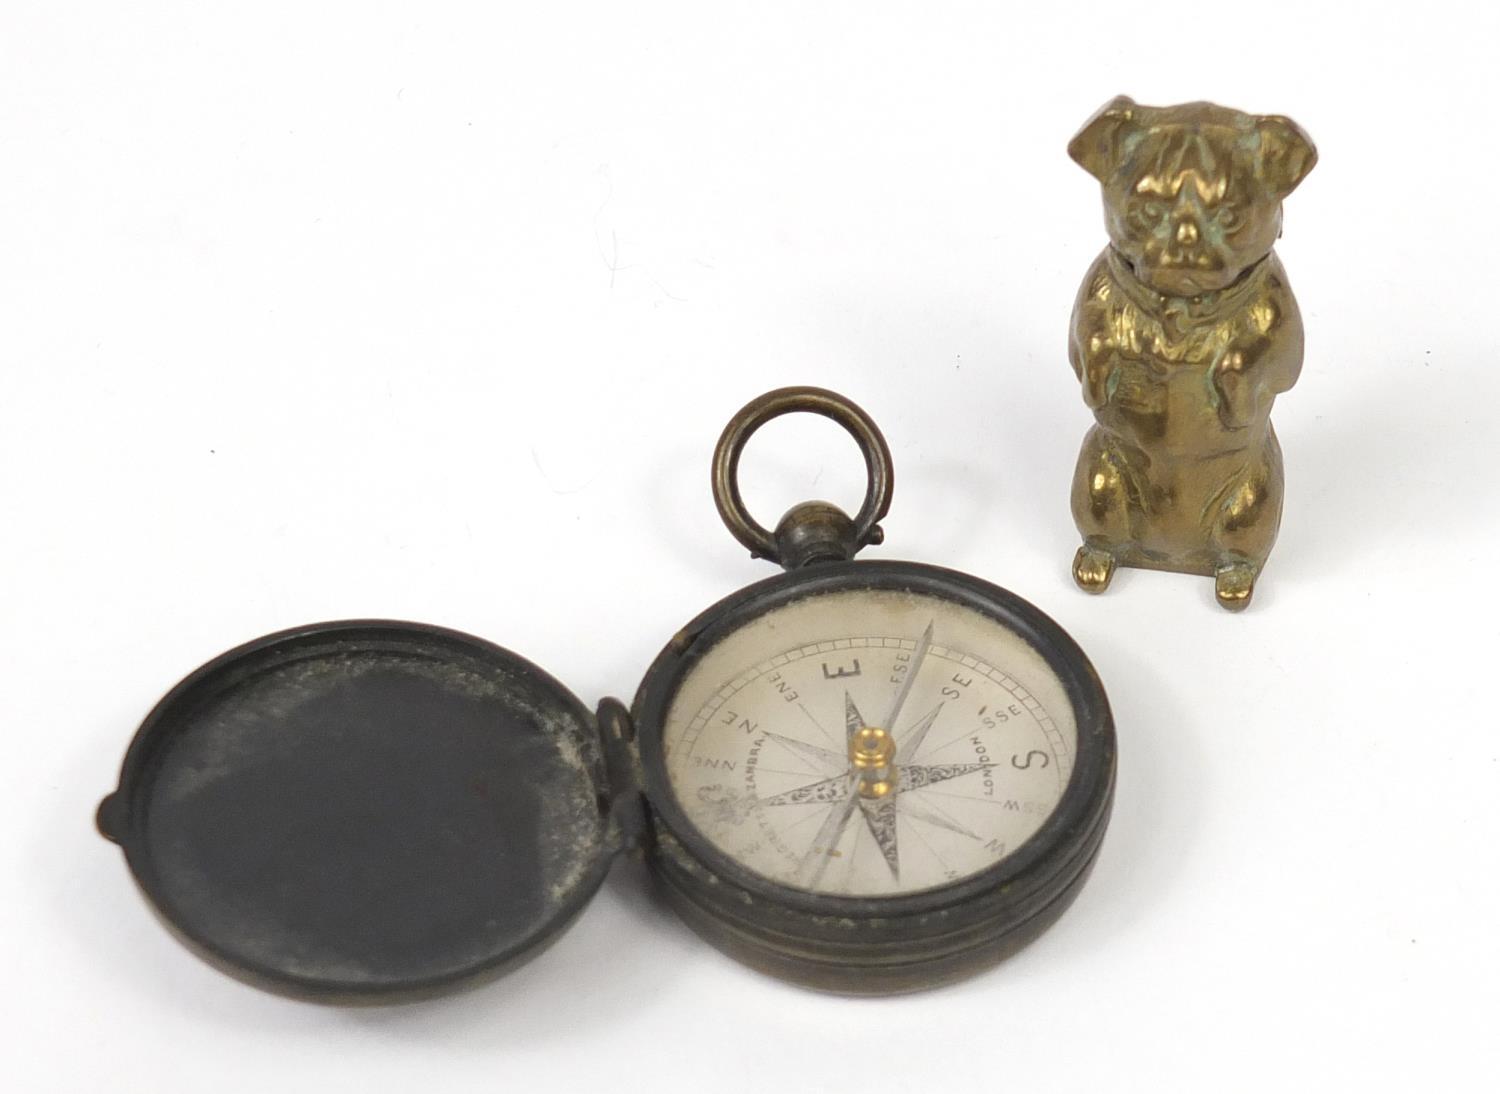 Novelty brass dog design vesta and a Negretti and Zambra compass : For Further Condition Reports